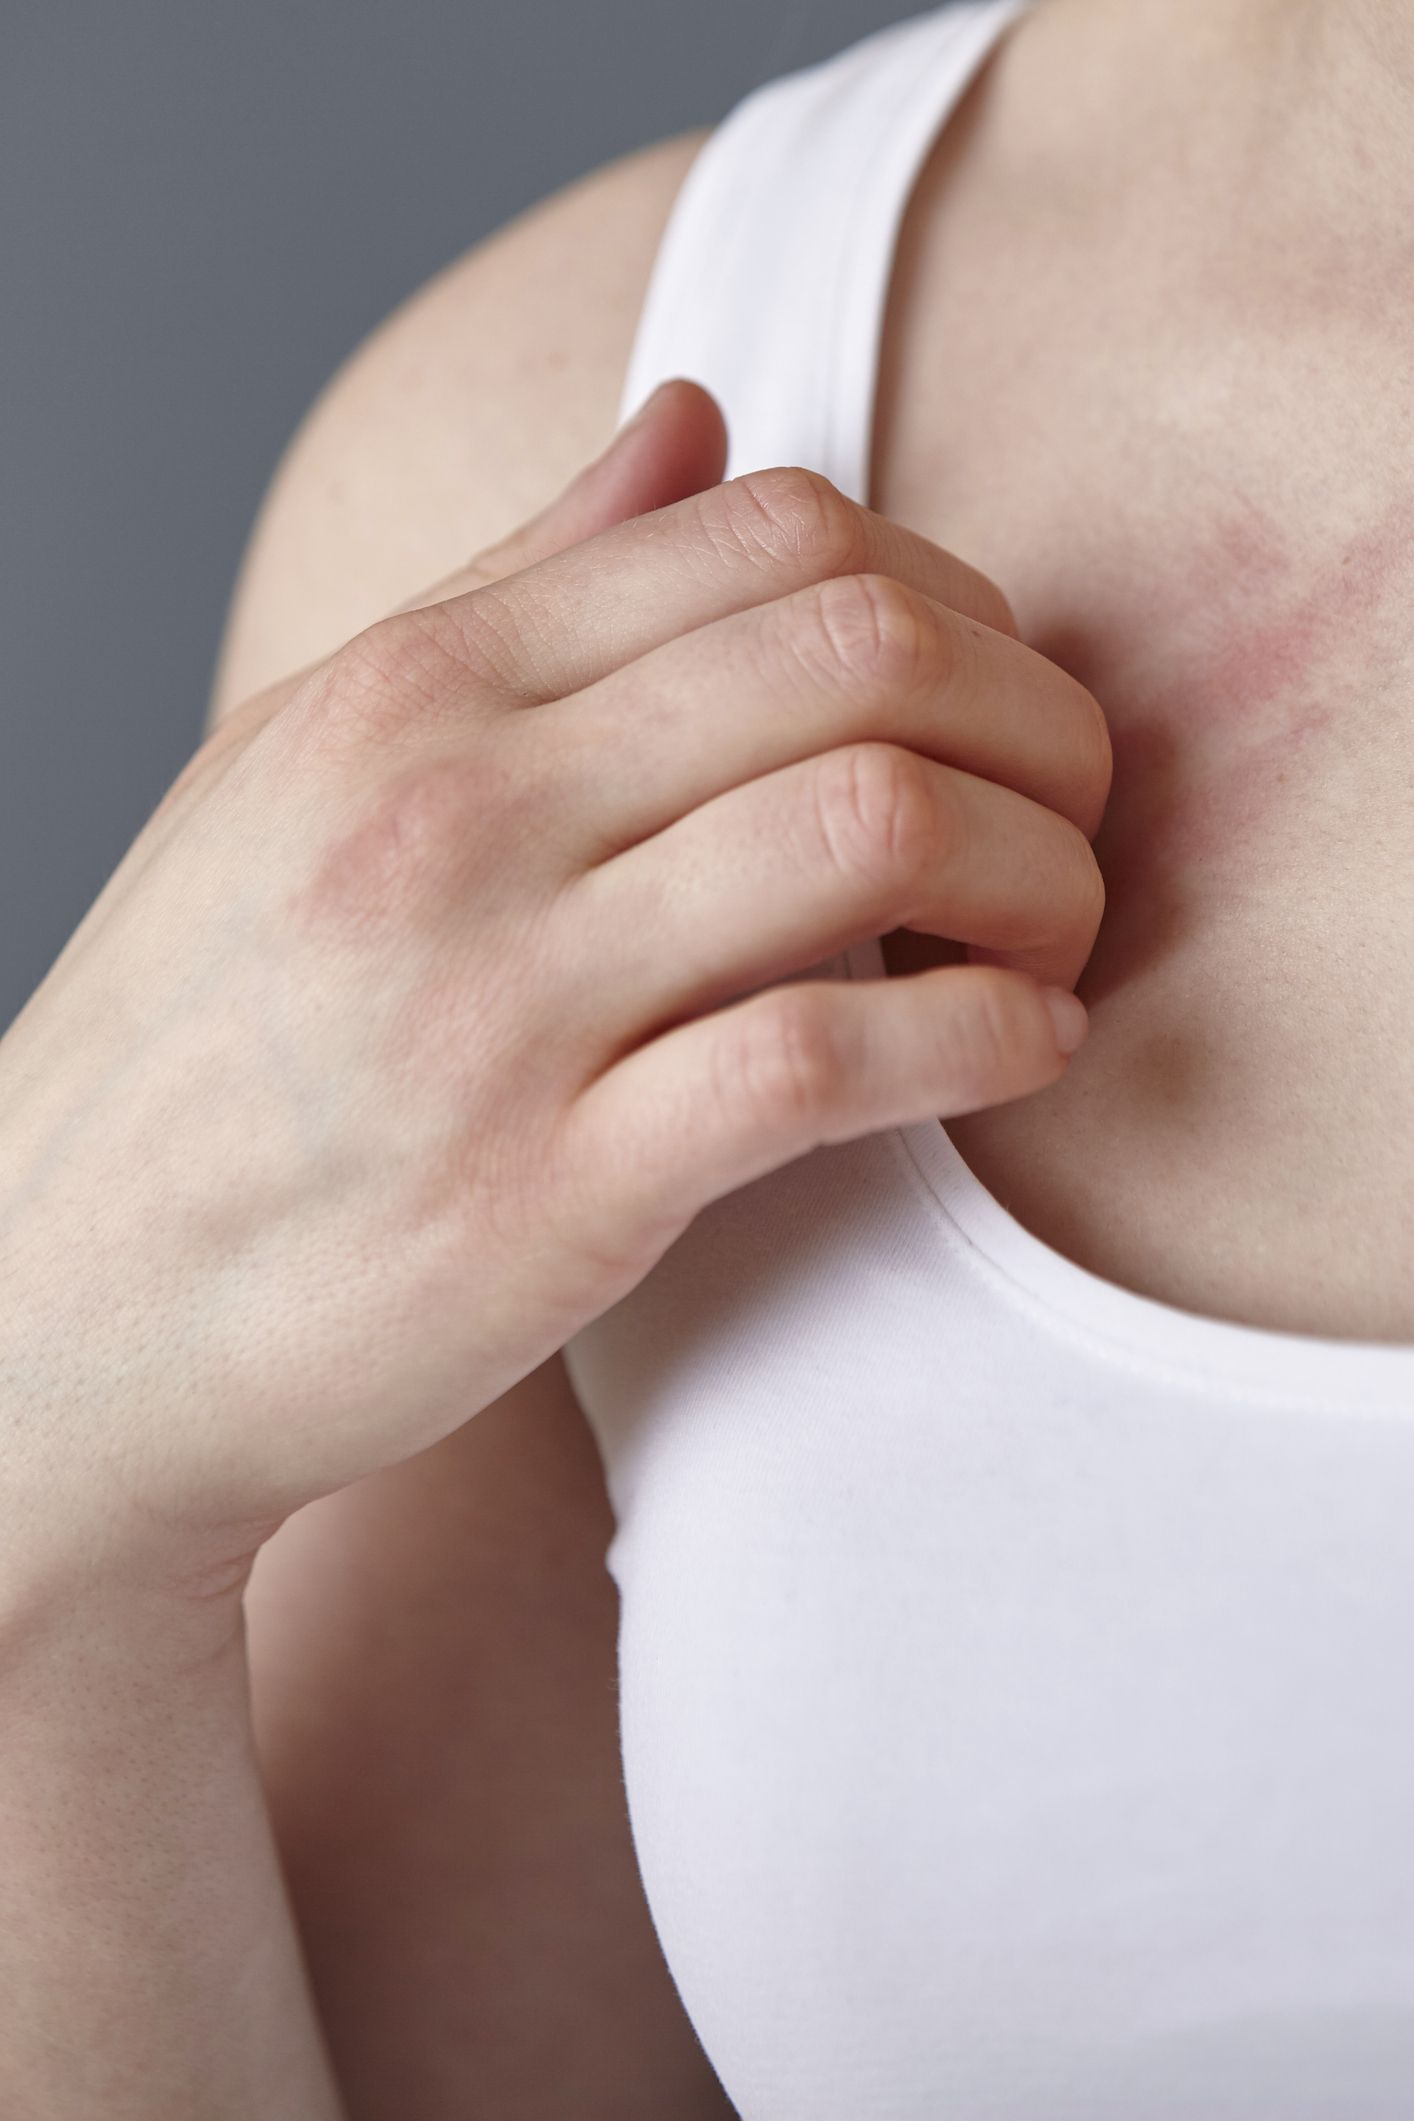 Breast Itch - Symptoms, Causes, Treatments